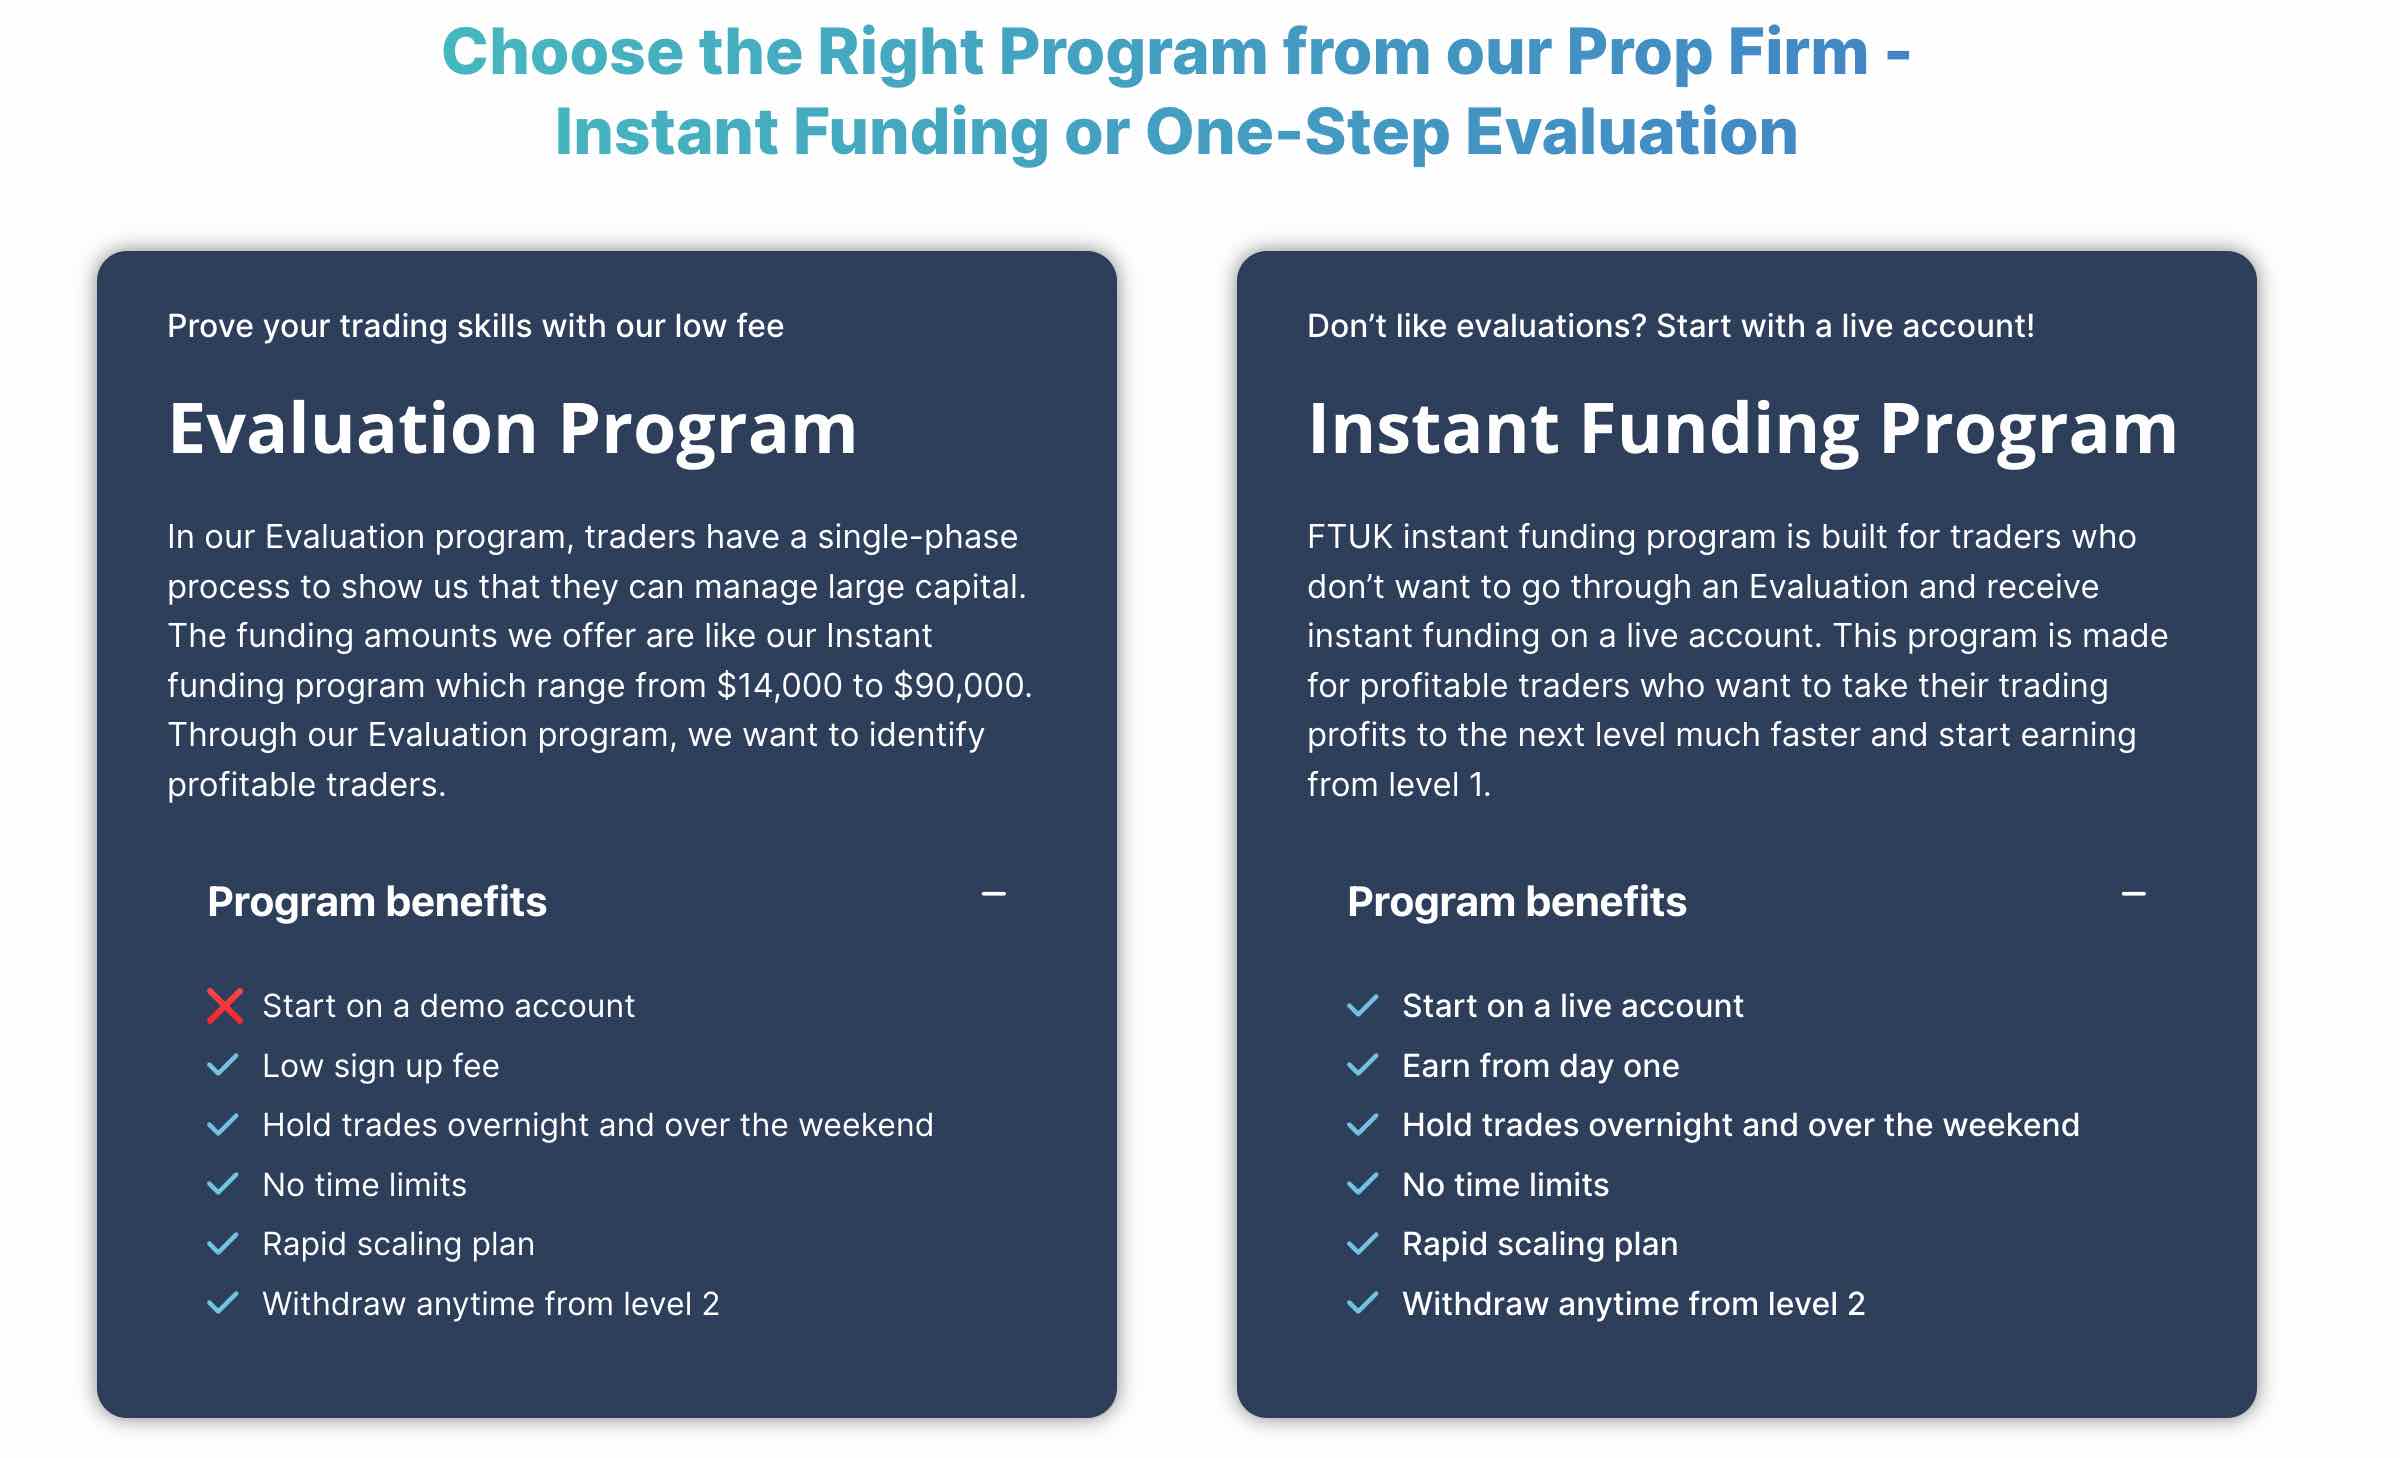 FTUK is a legit prop firm that offers single step evaluation as well as instant funding option